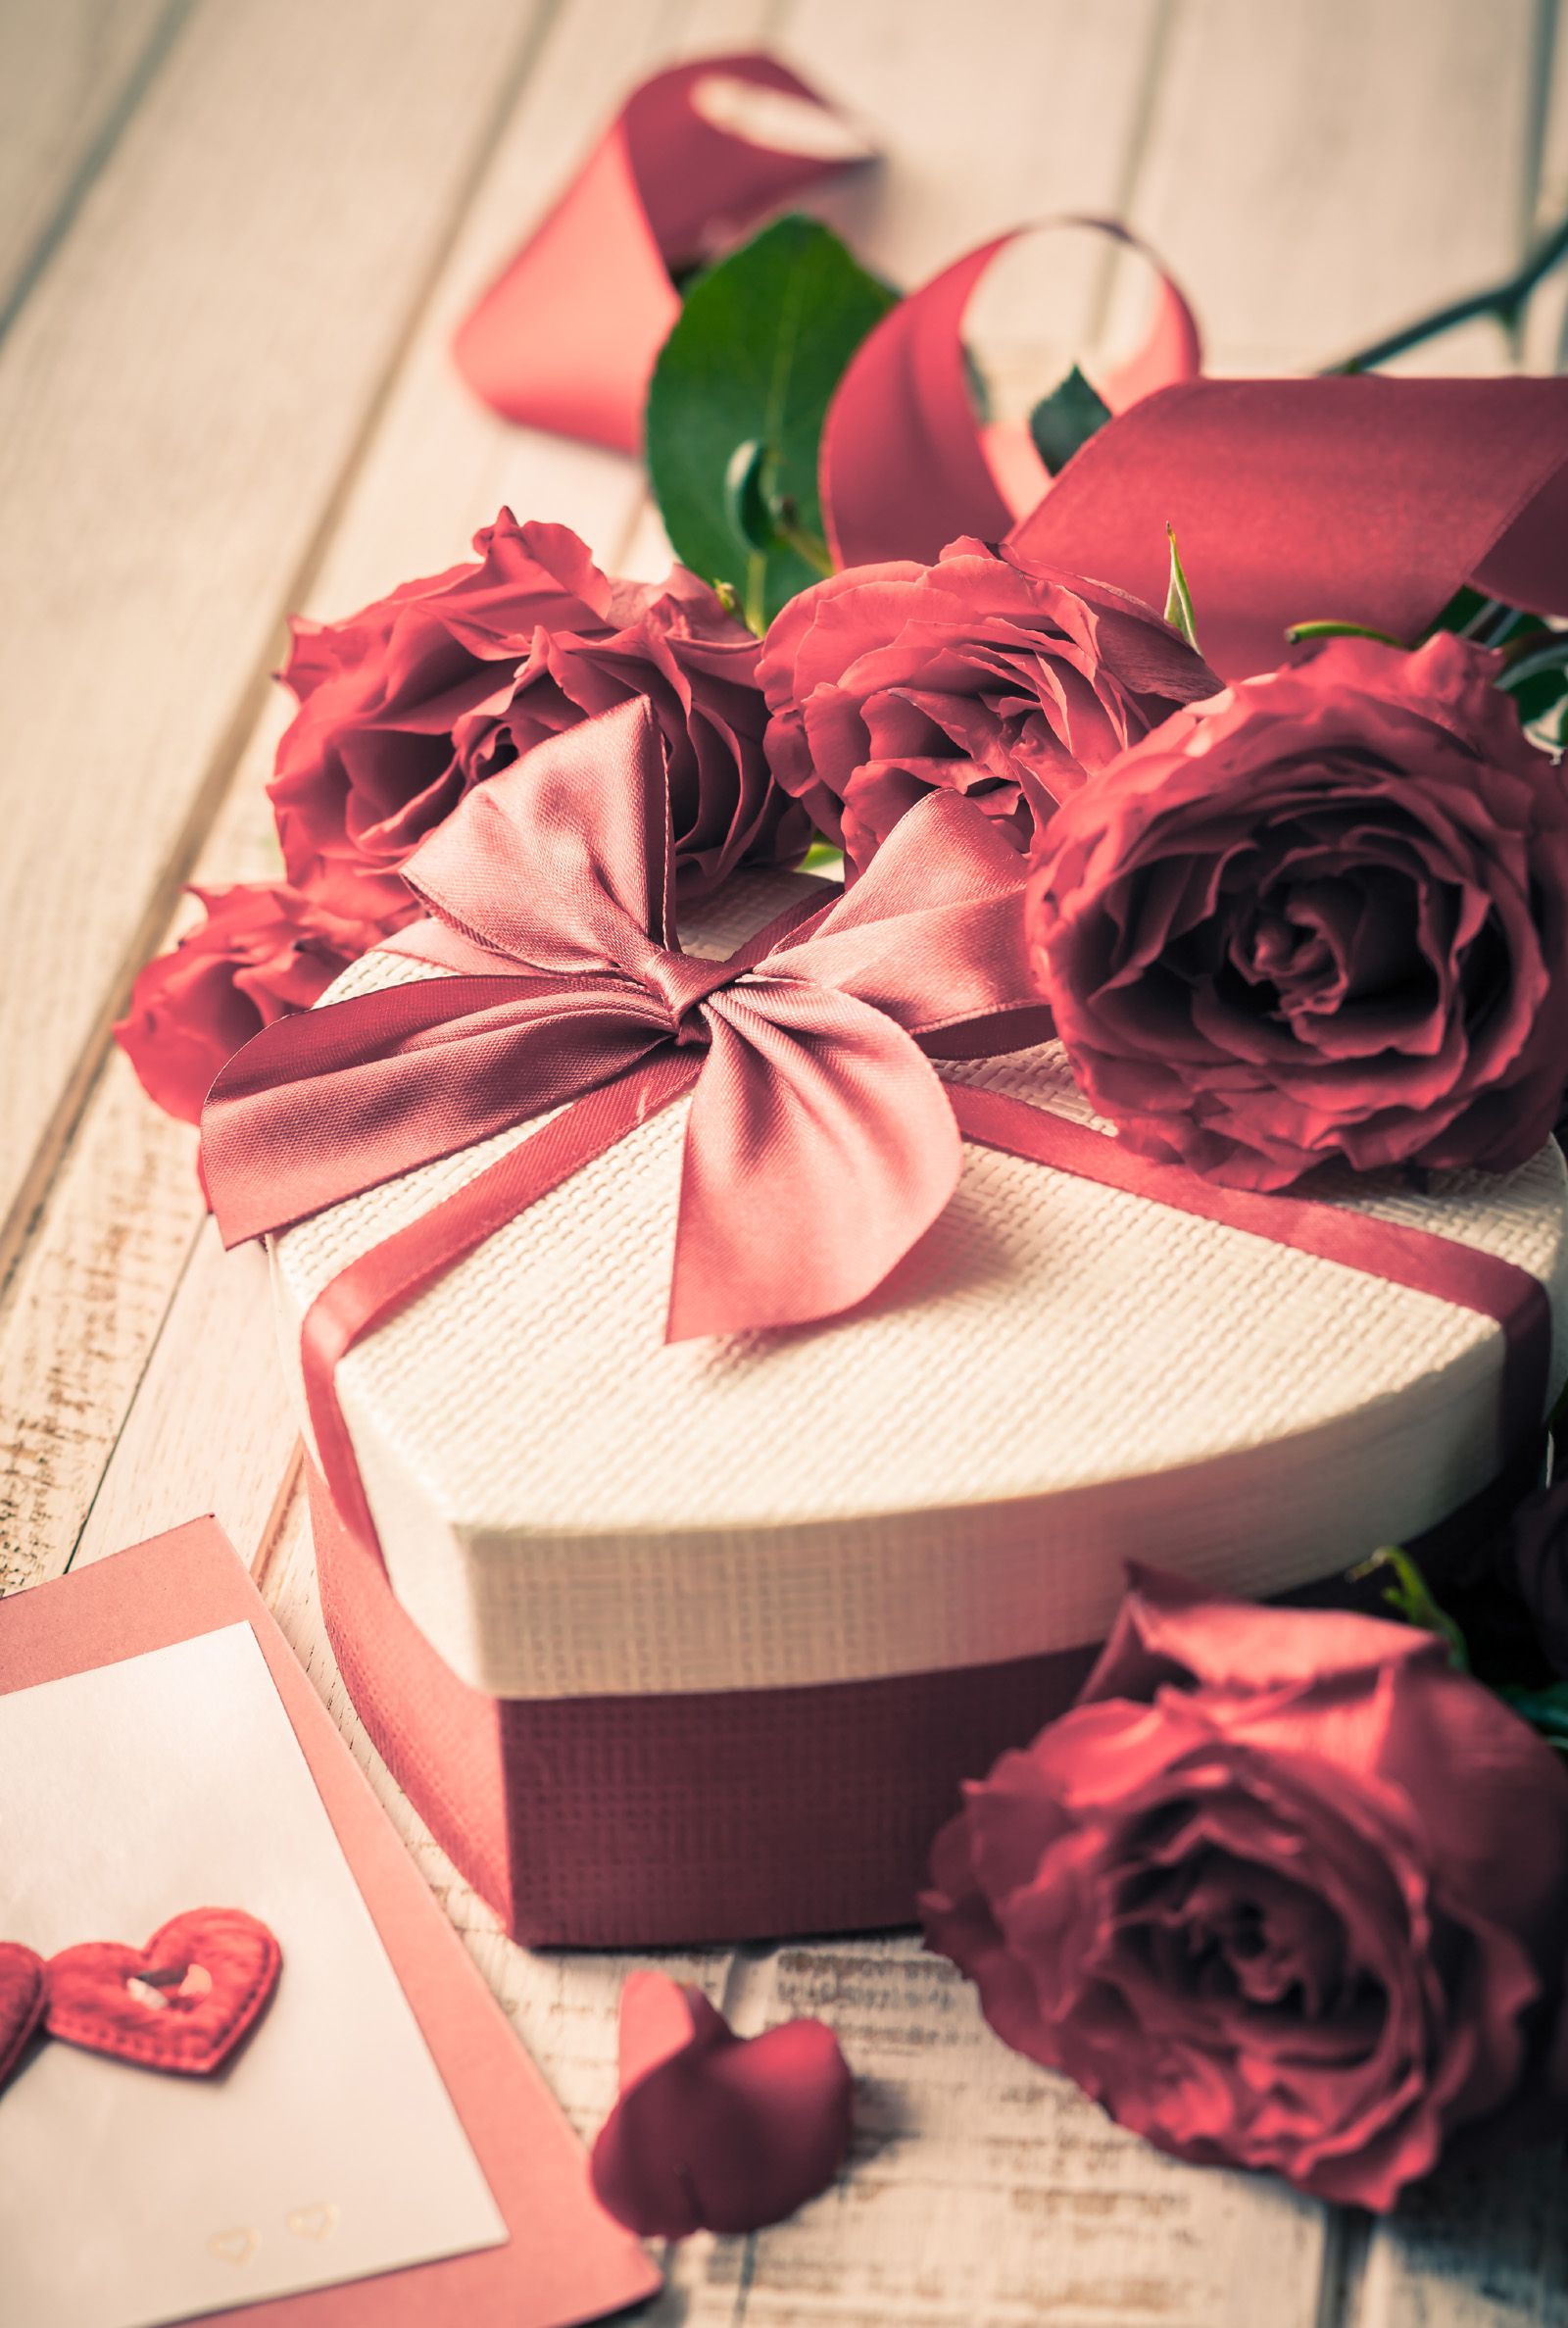 Roses And Heart Shaped Gift Box 51592 .freegreatpicture.com